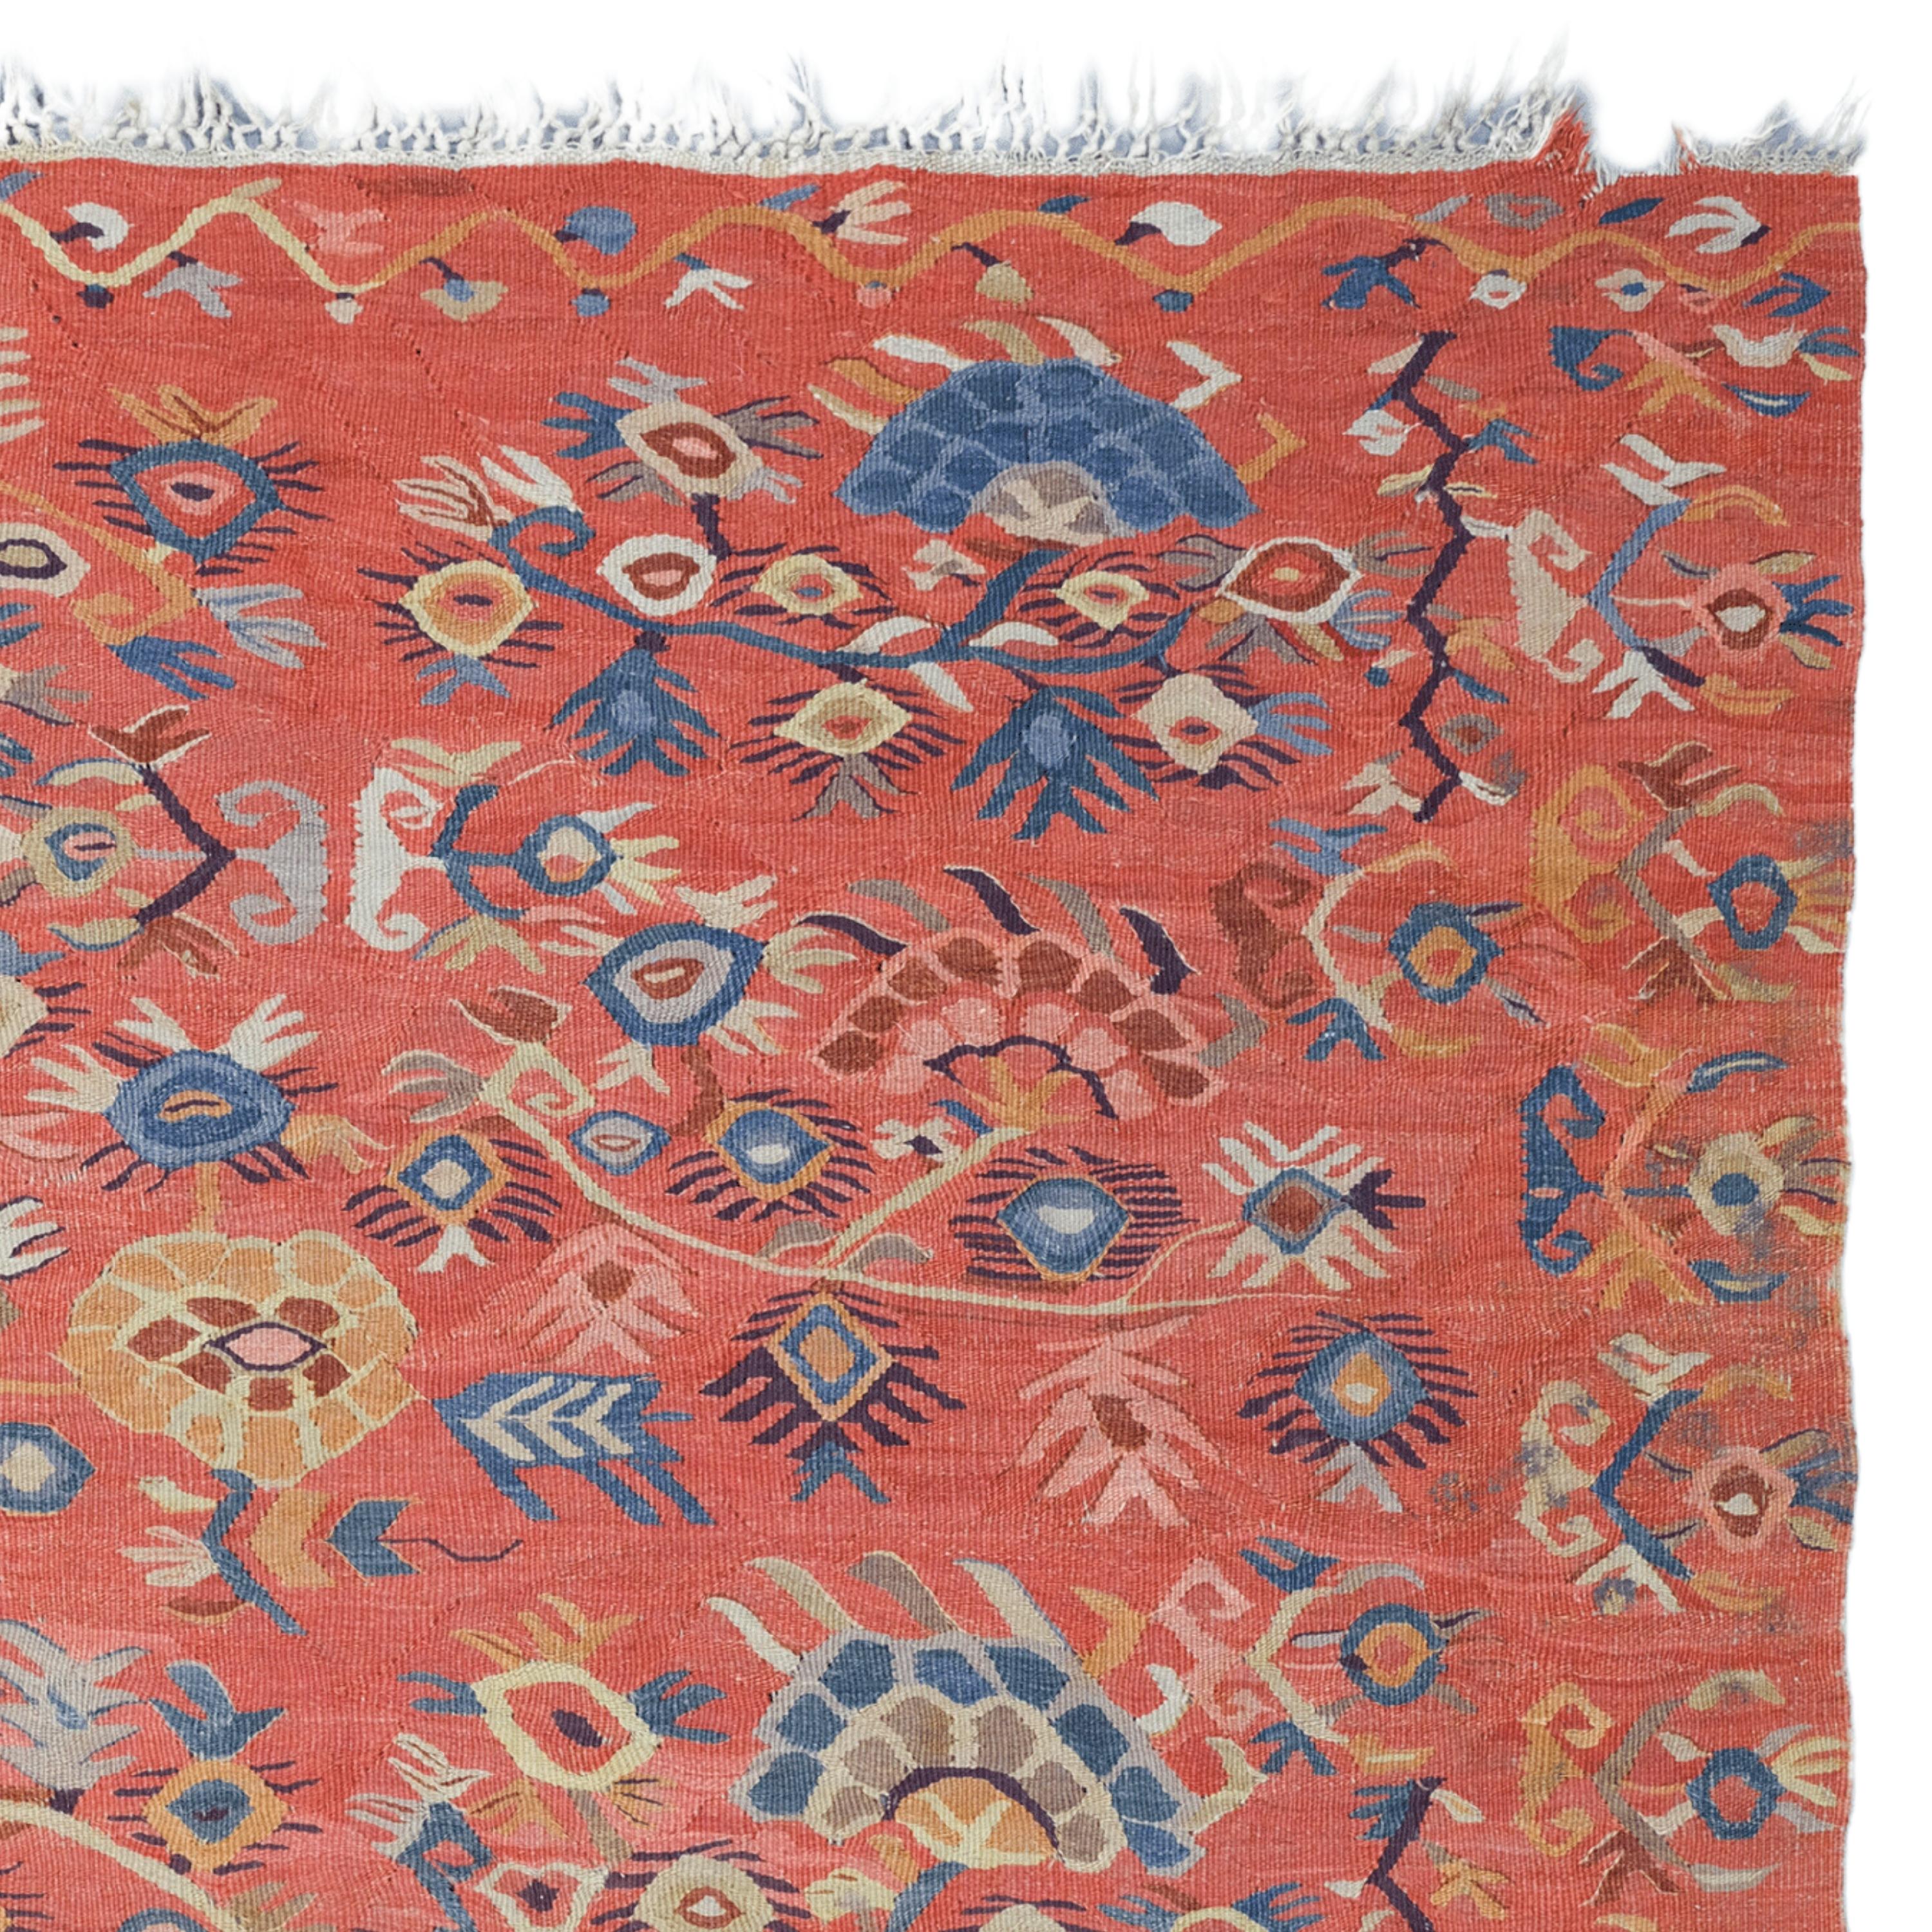 Antique Ottoman Kilim - Early 19th Century Ottoman Kilim, Antique Rug In Good Condition For Sale In Sultanahmet, 34